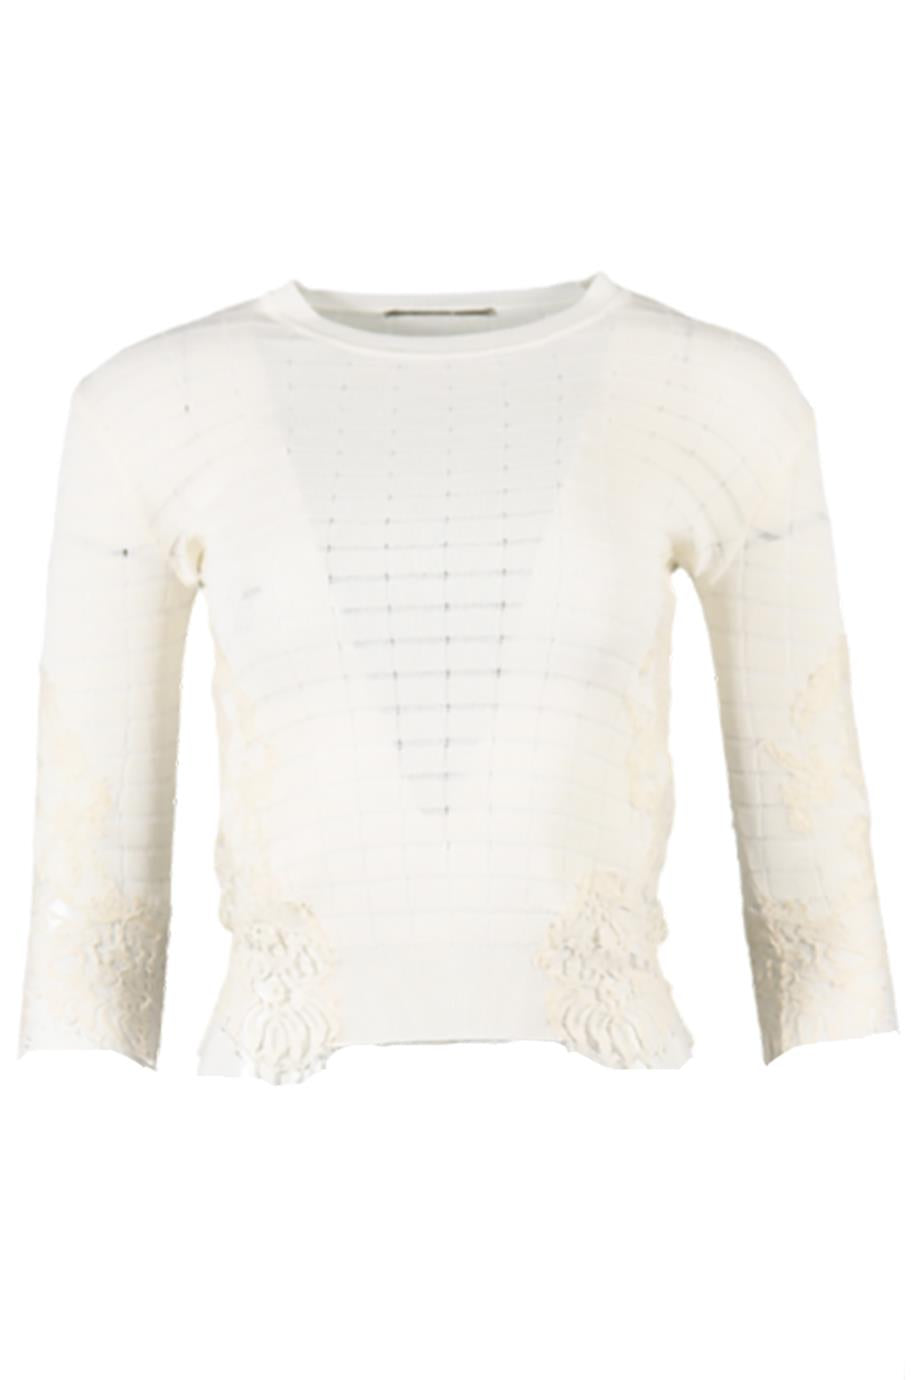 ERMANNO SCERVINO LACE AND KNIT TOP IT 38 UK 6